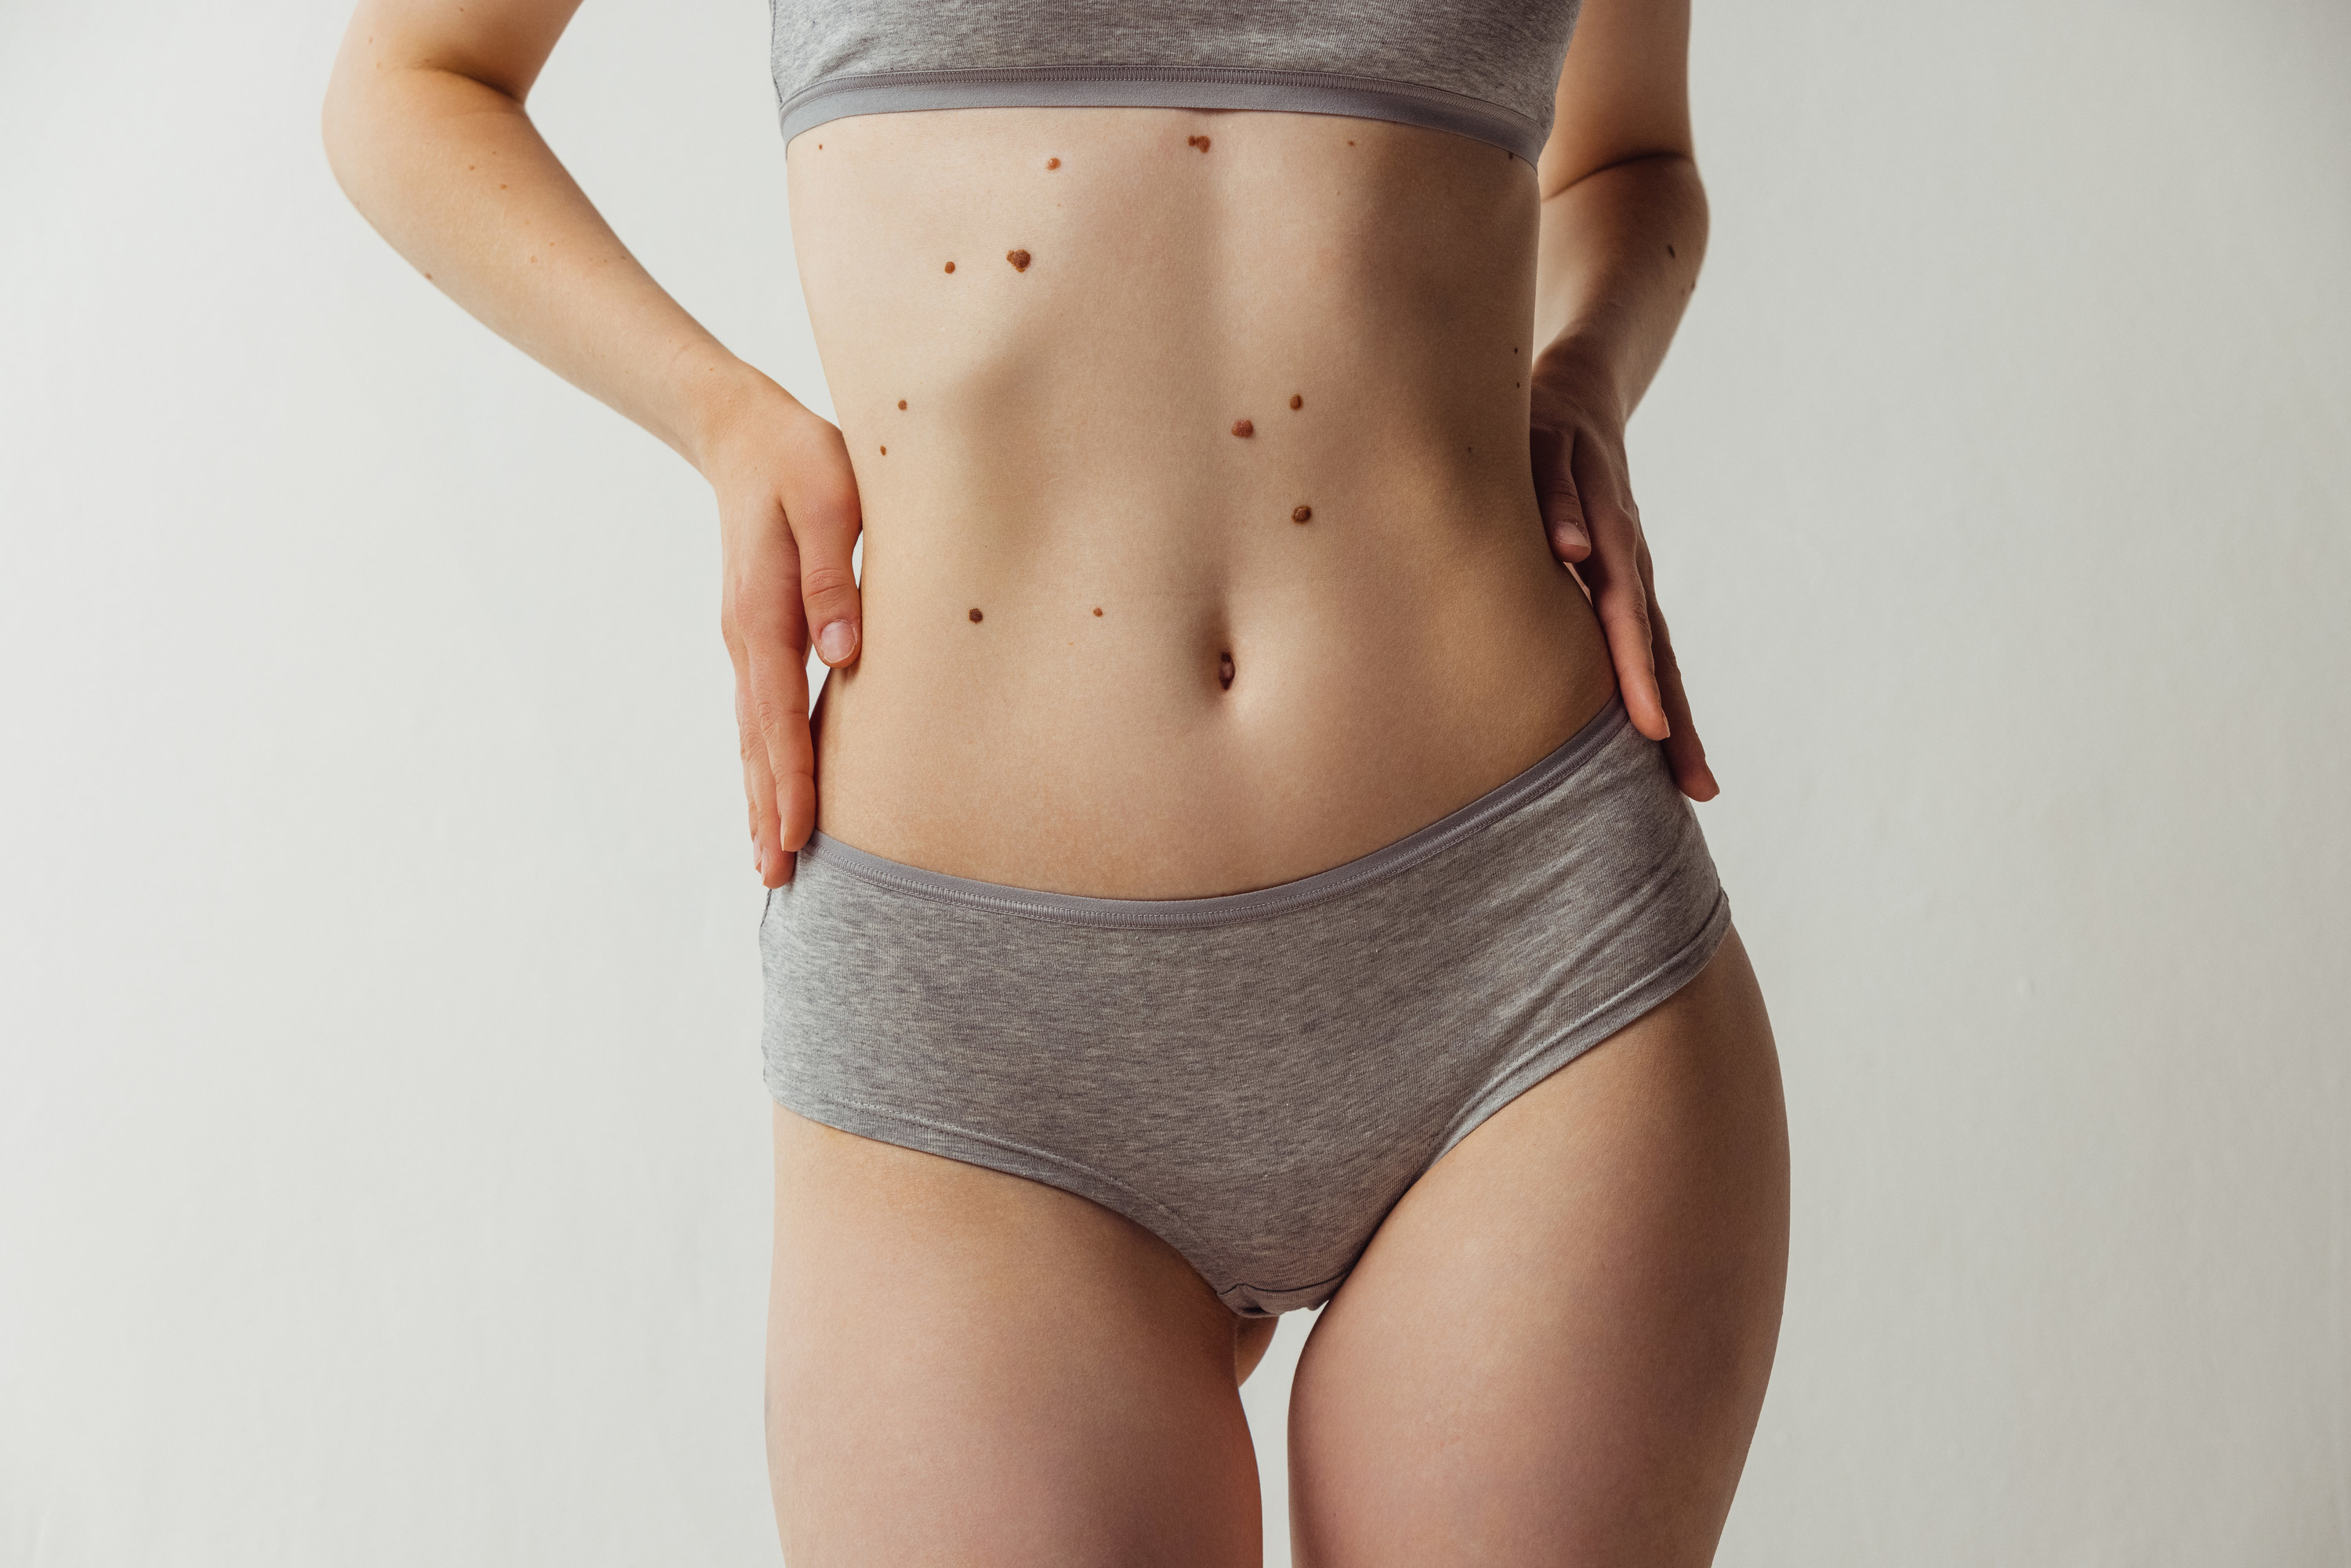 A woman with moles on her body